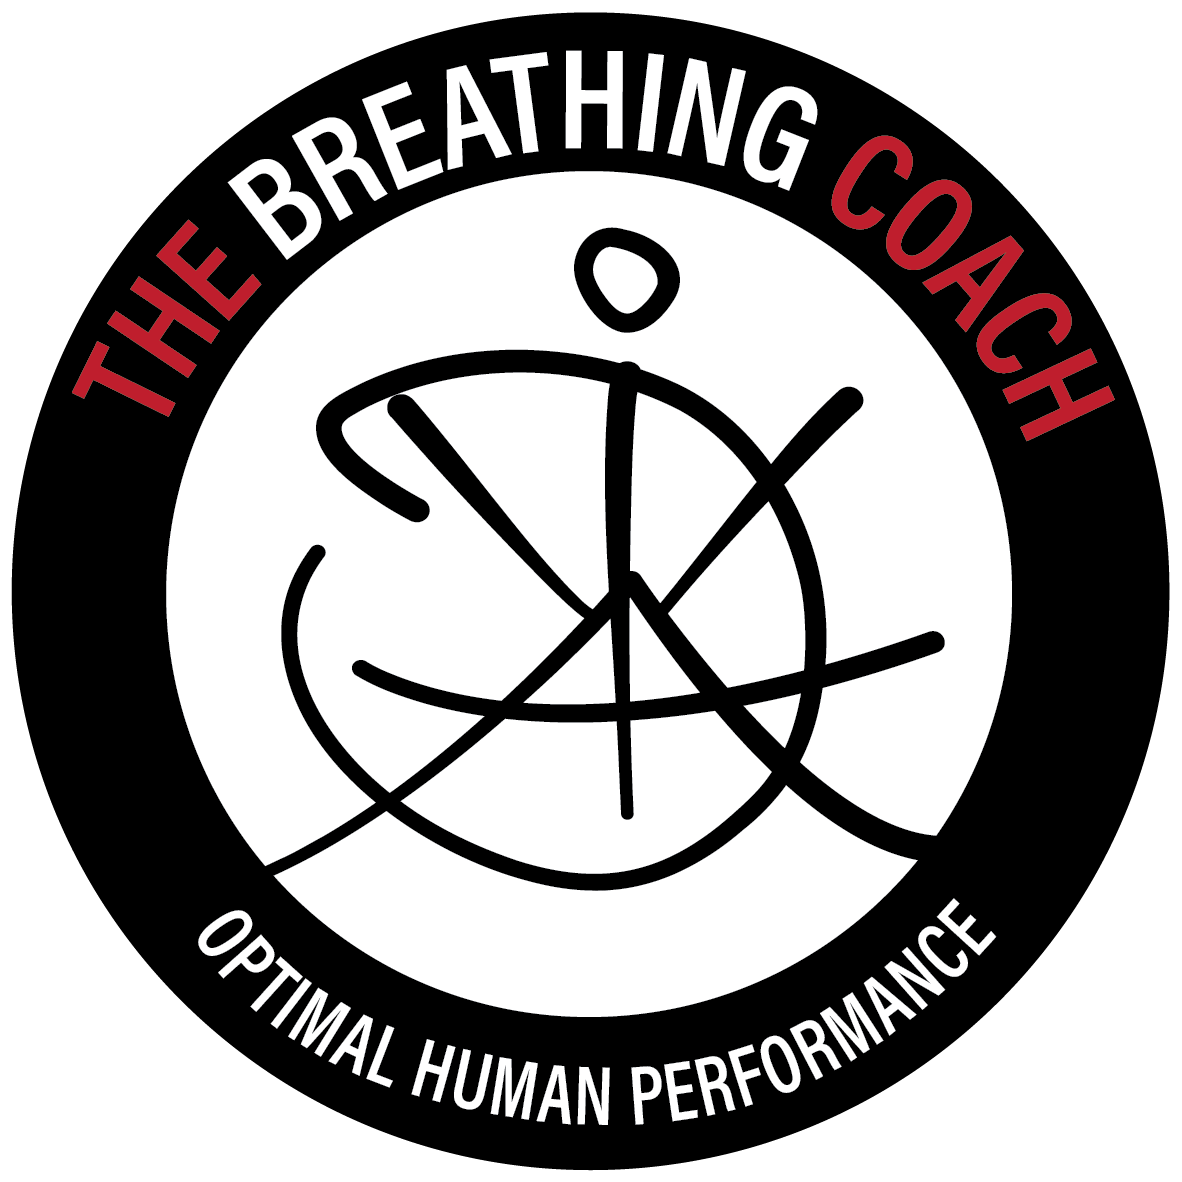 The Breathing Coach